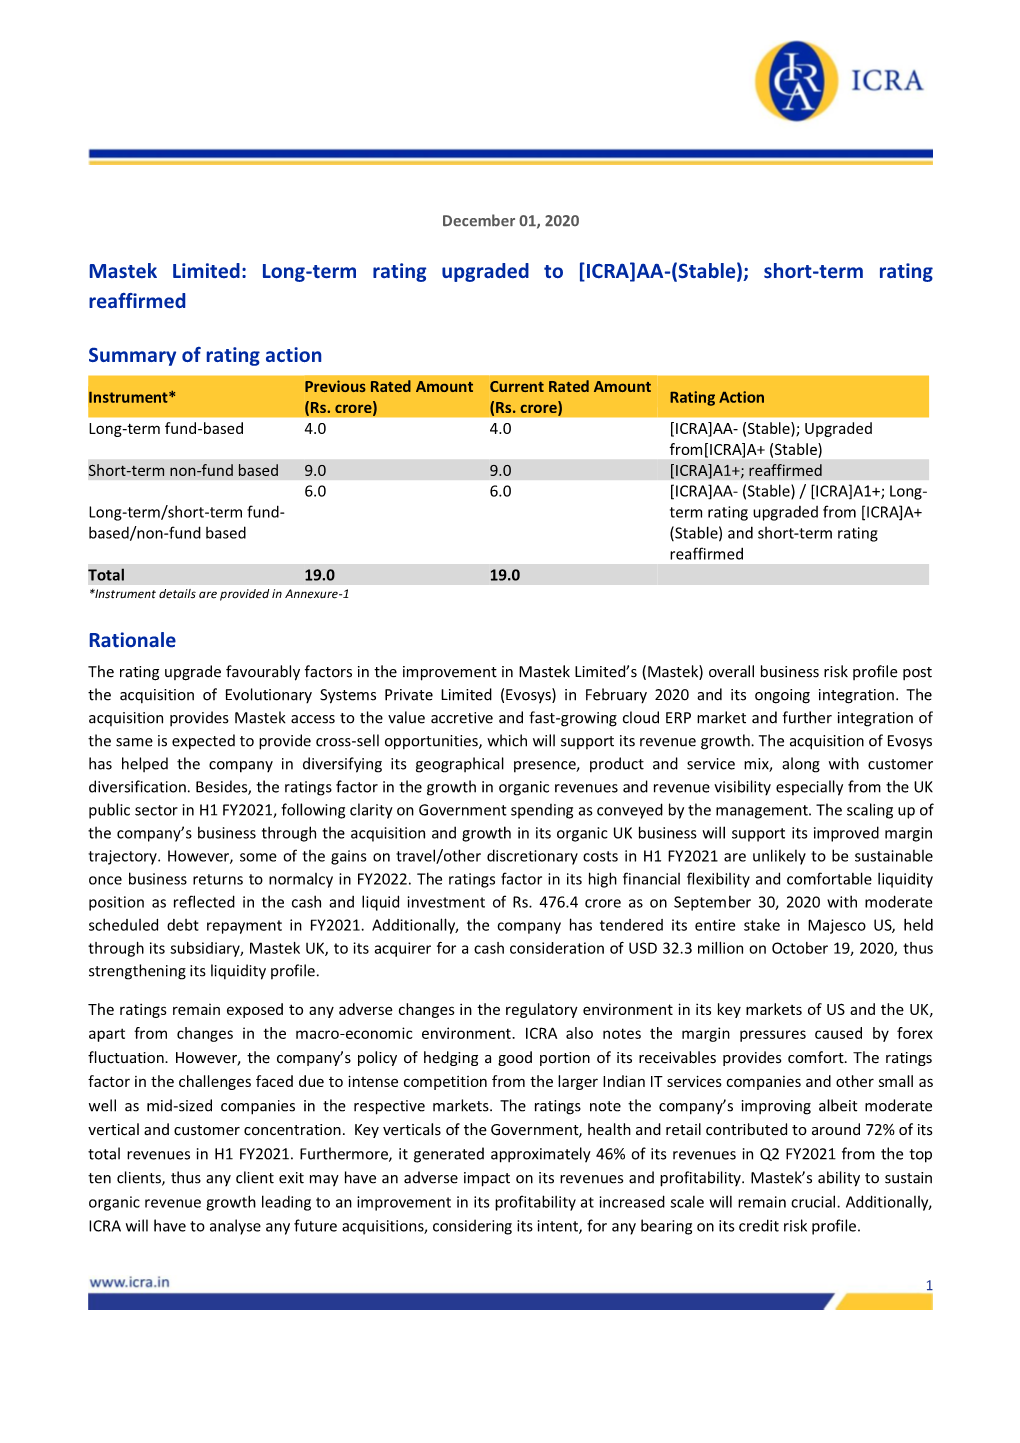 Mastek Limited: Long-Term Rating Upgraded to [ICRA]AA-(Stable); Short-Term Rating Reaffirmed